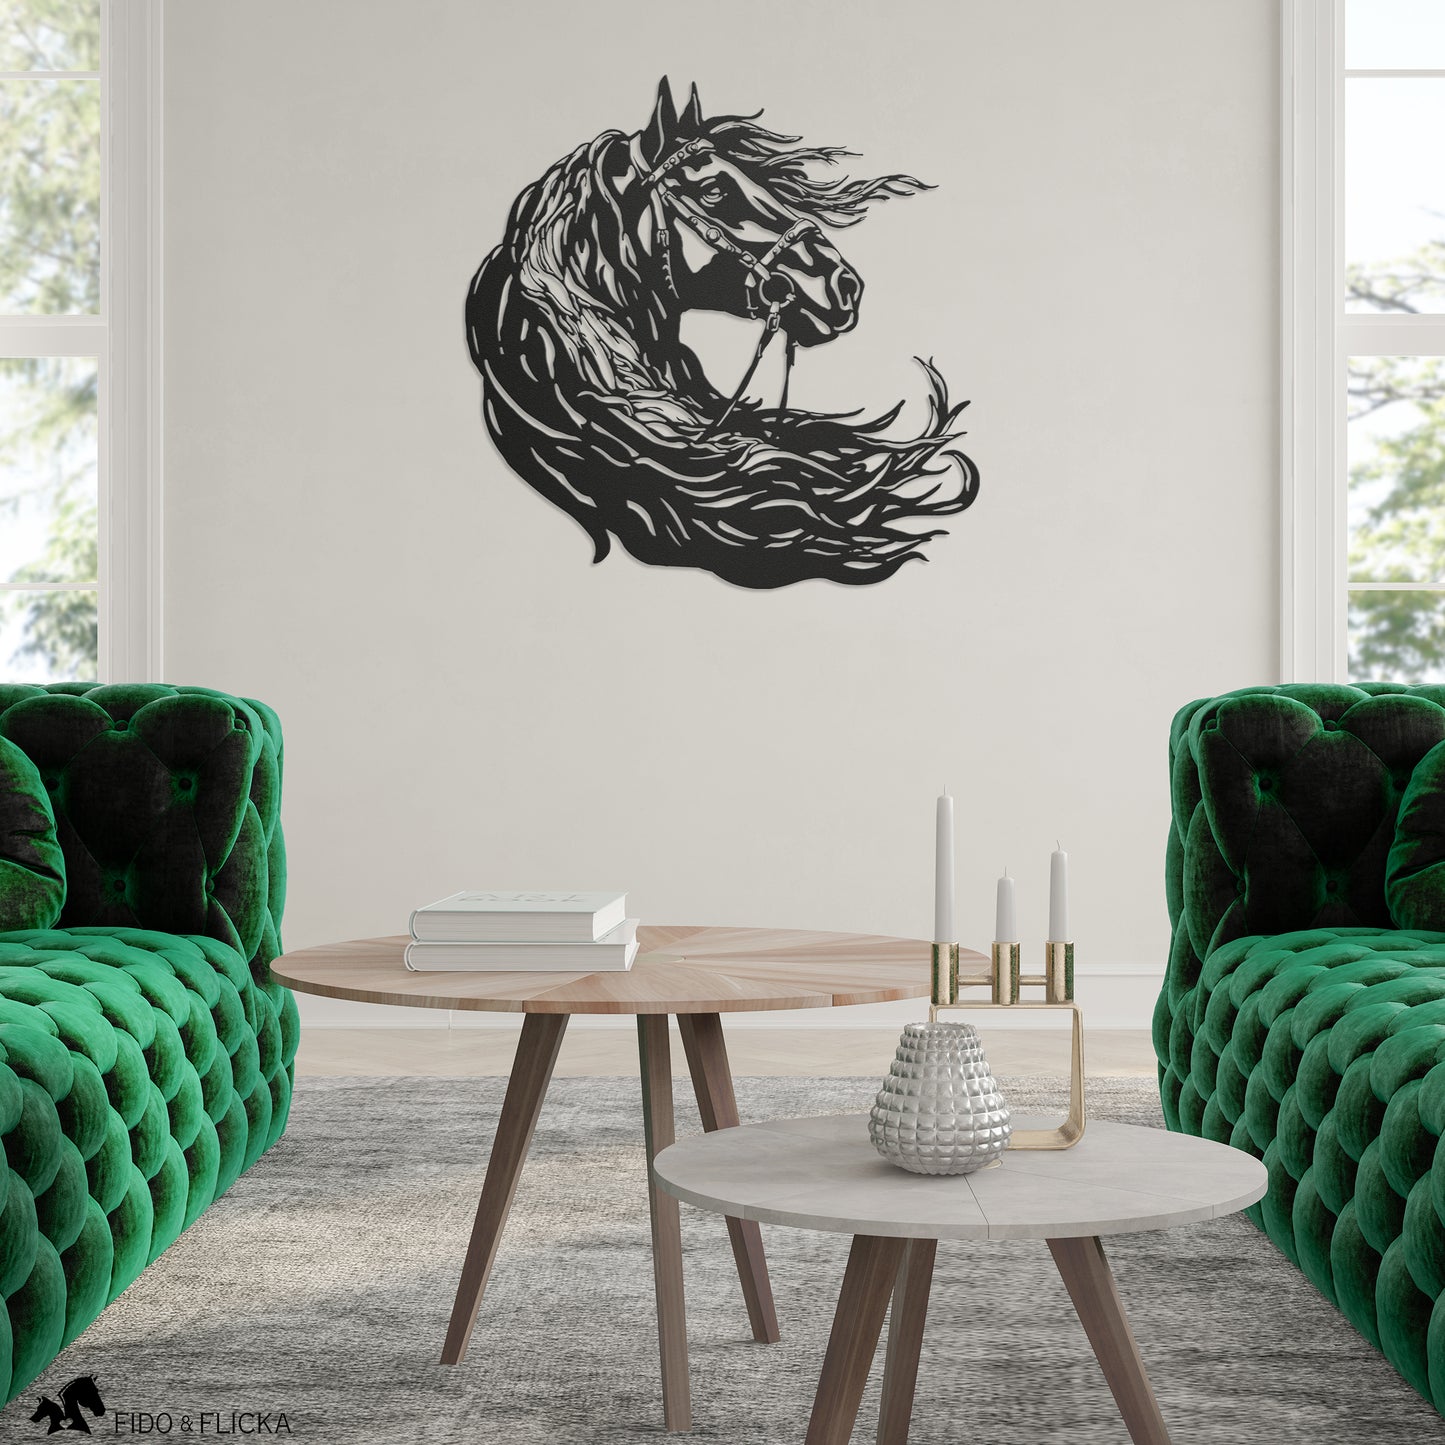 Friesian horse with flowing mane metal wall art in living room